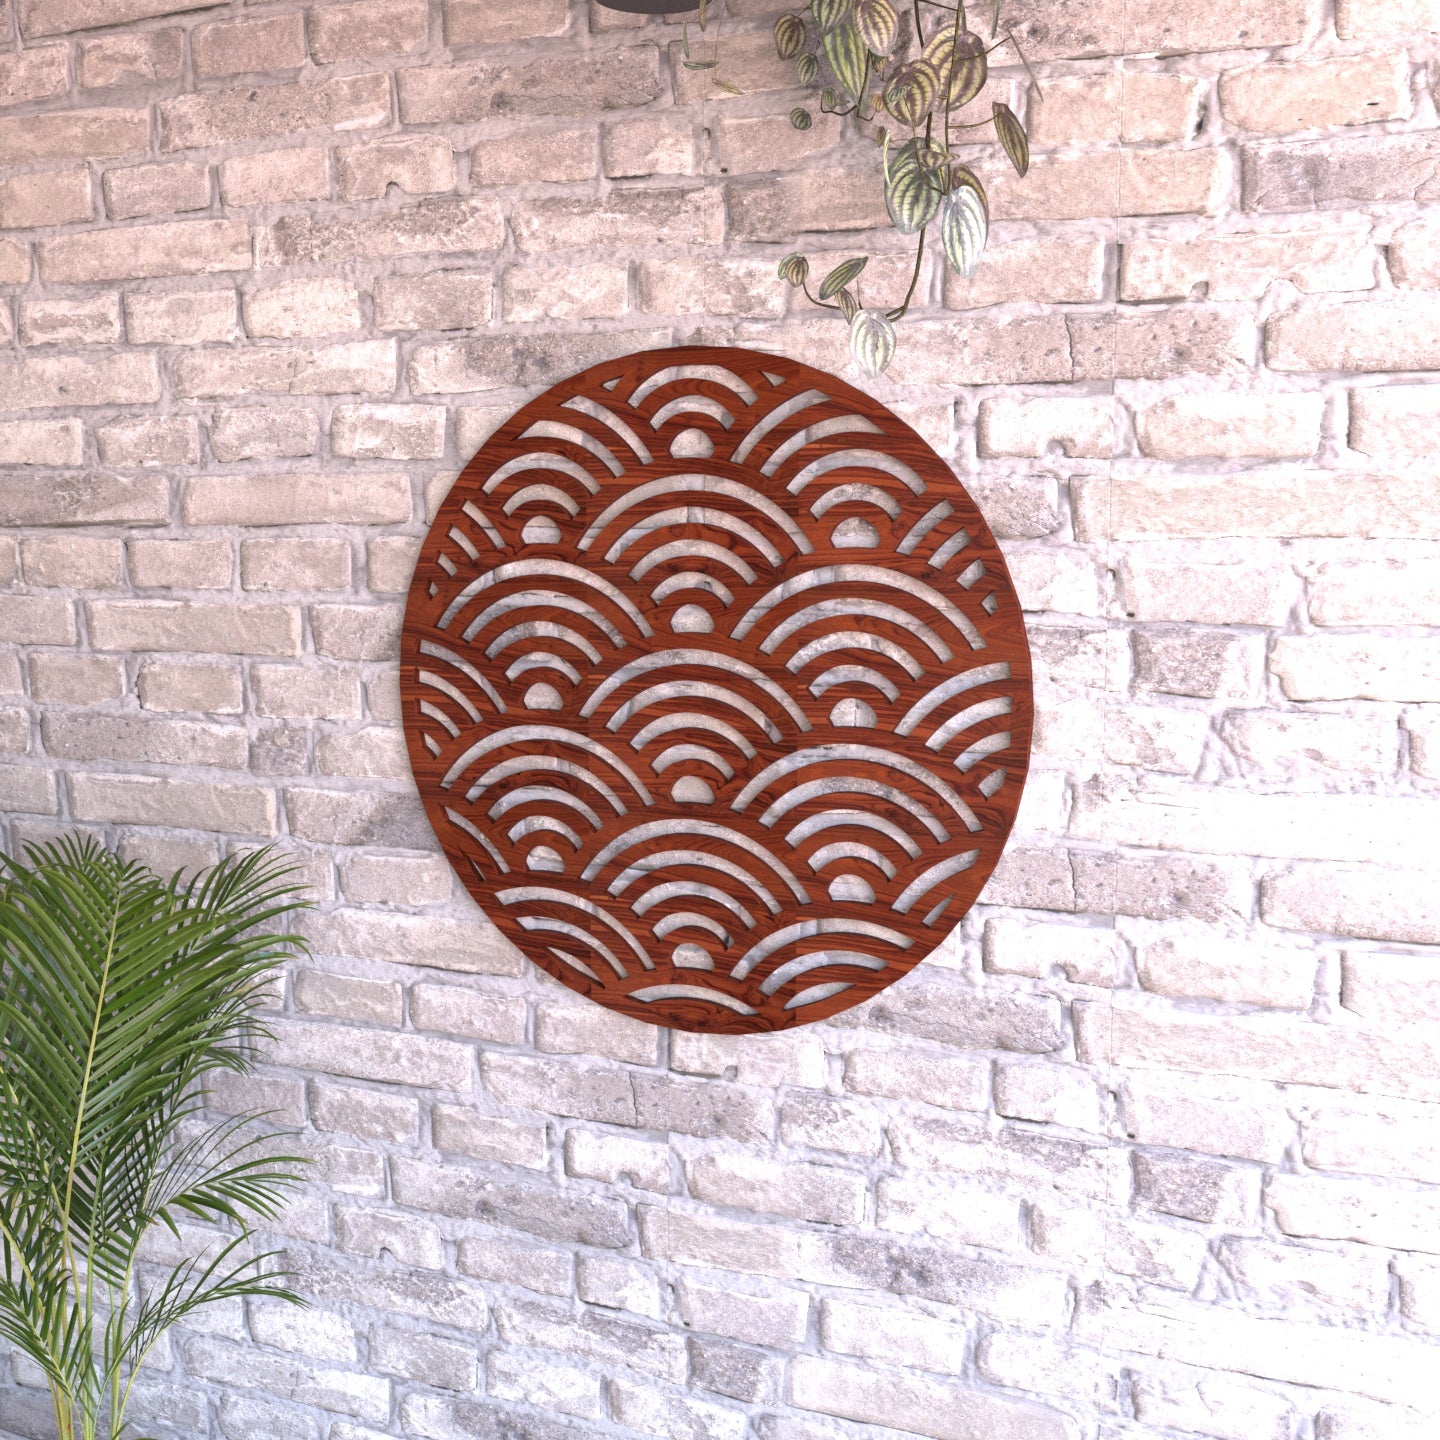 Aesthetic Antique Sea Round Wooden Wall Decor Yantra Wall Decor